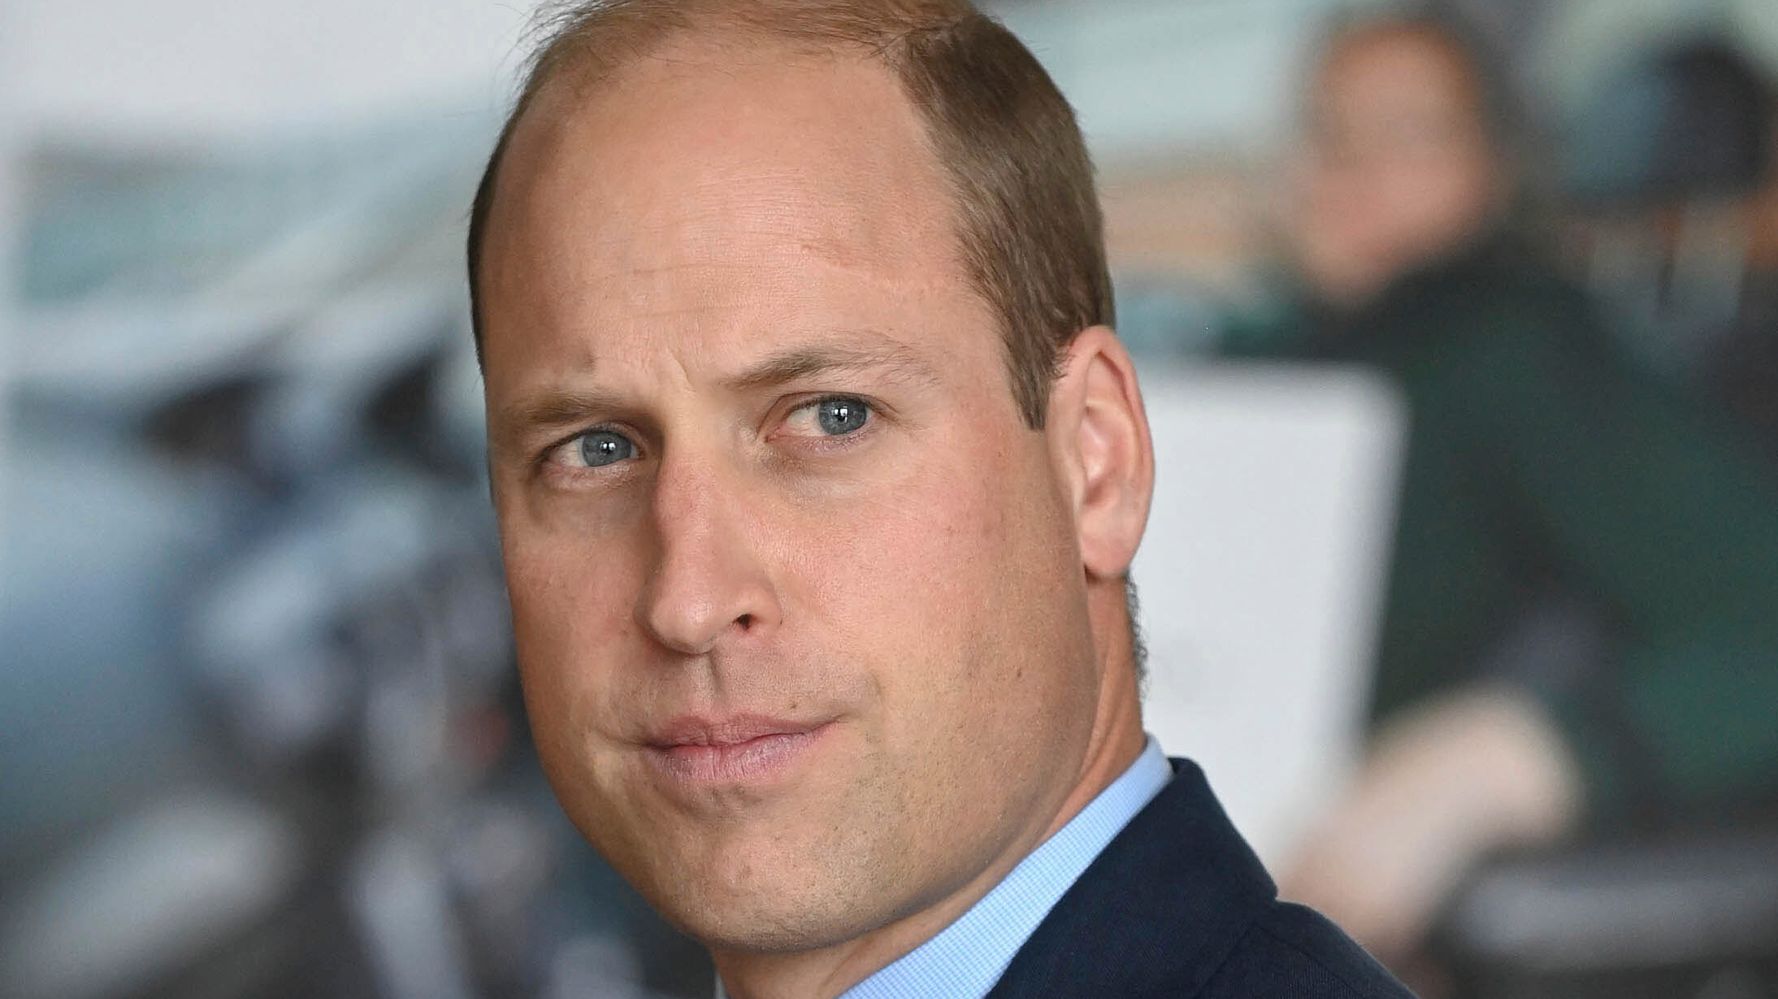 Prince William Contracted COVID-19 In April: Reports